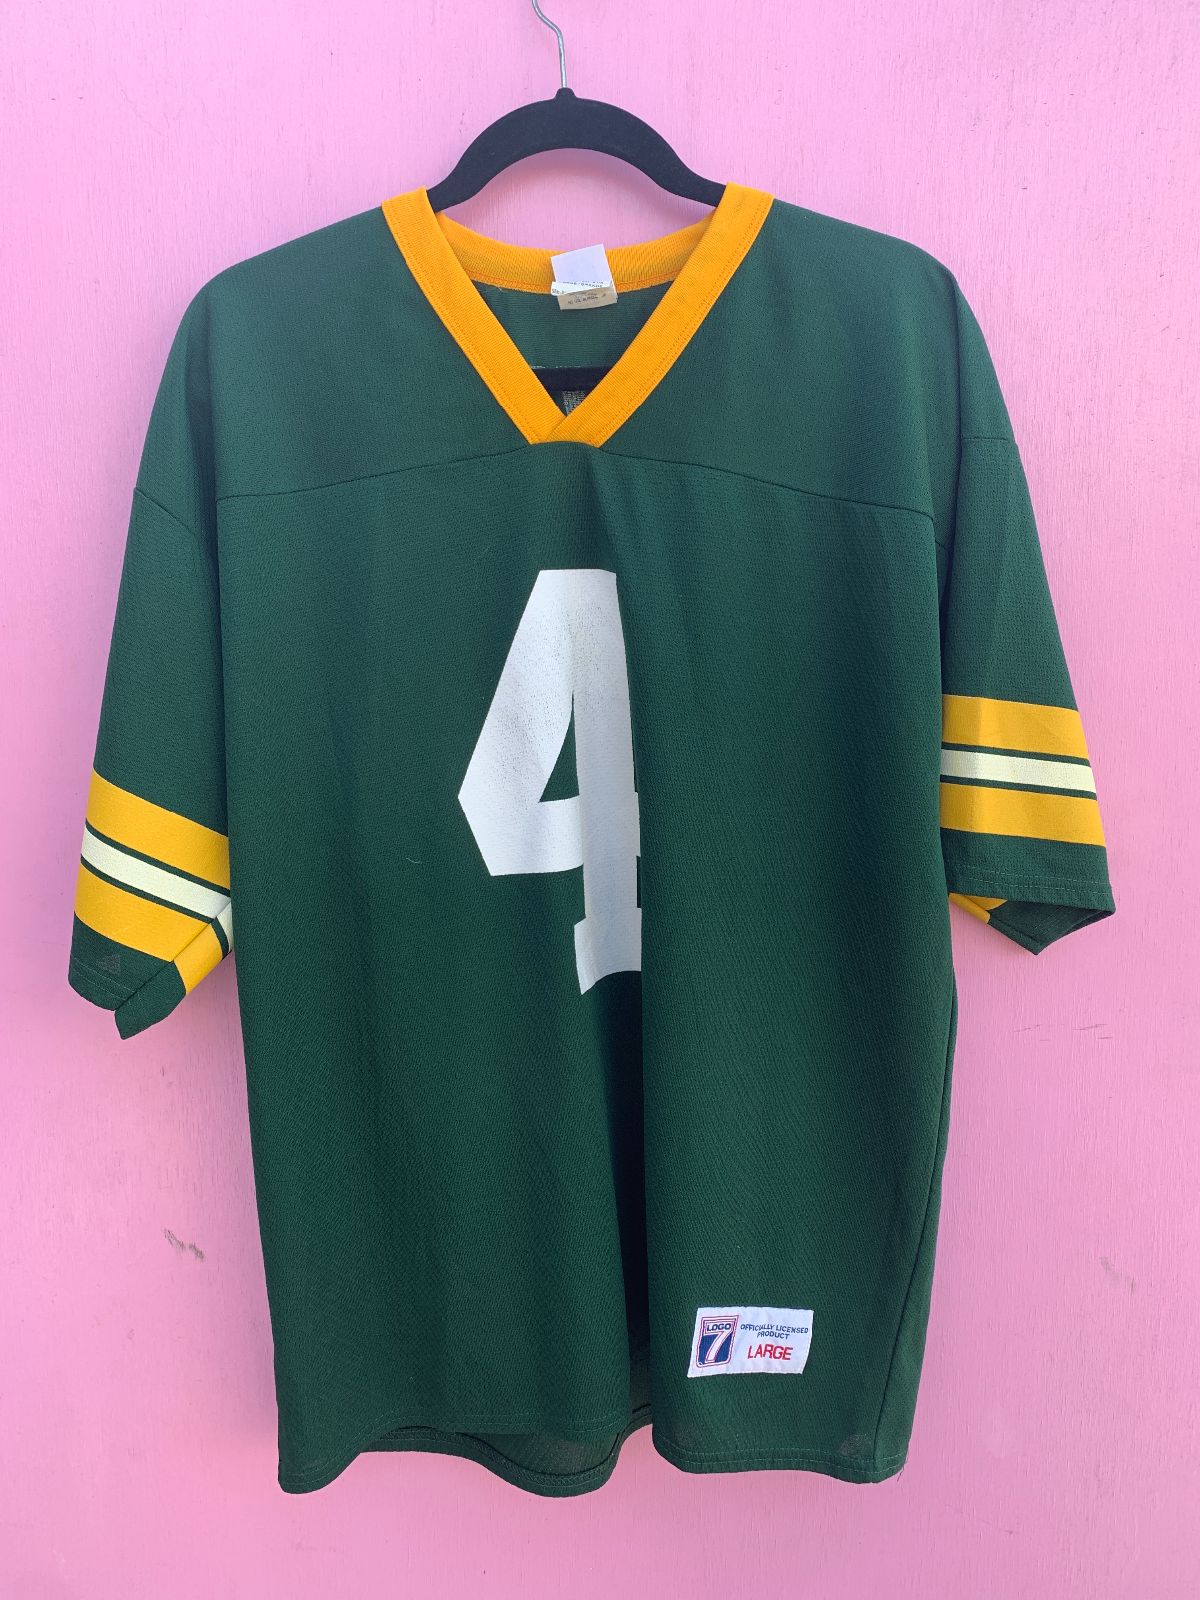 product details: NFL GREEN BAY PACKERS #4 FARVE FOOTBALL JERSEY photo